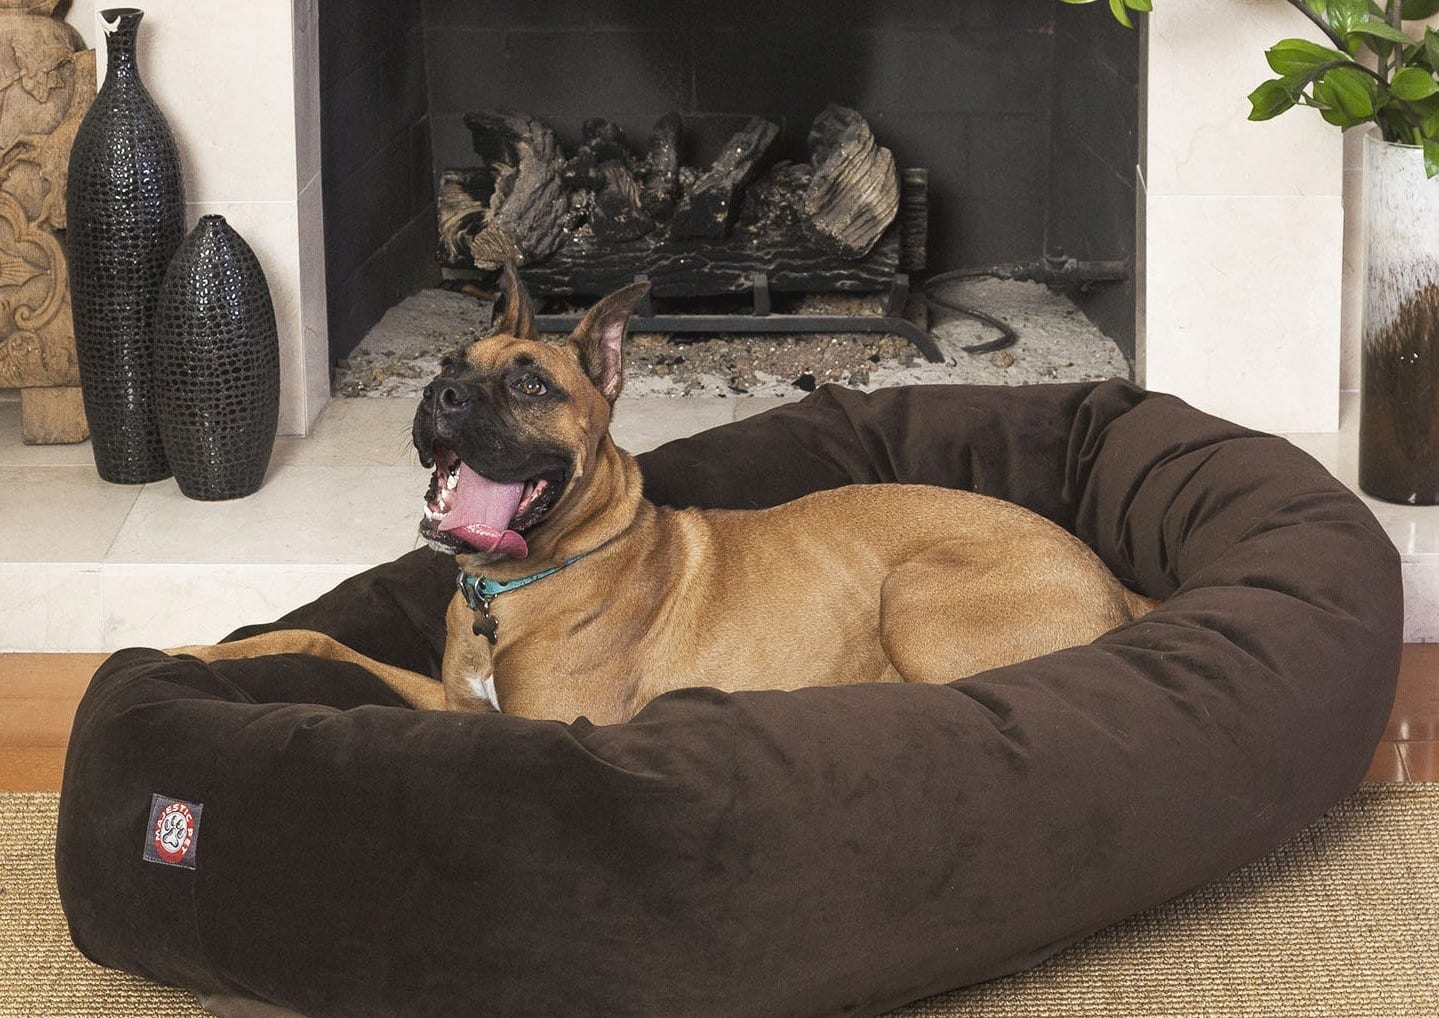 extra large dog beds for 2 dogs